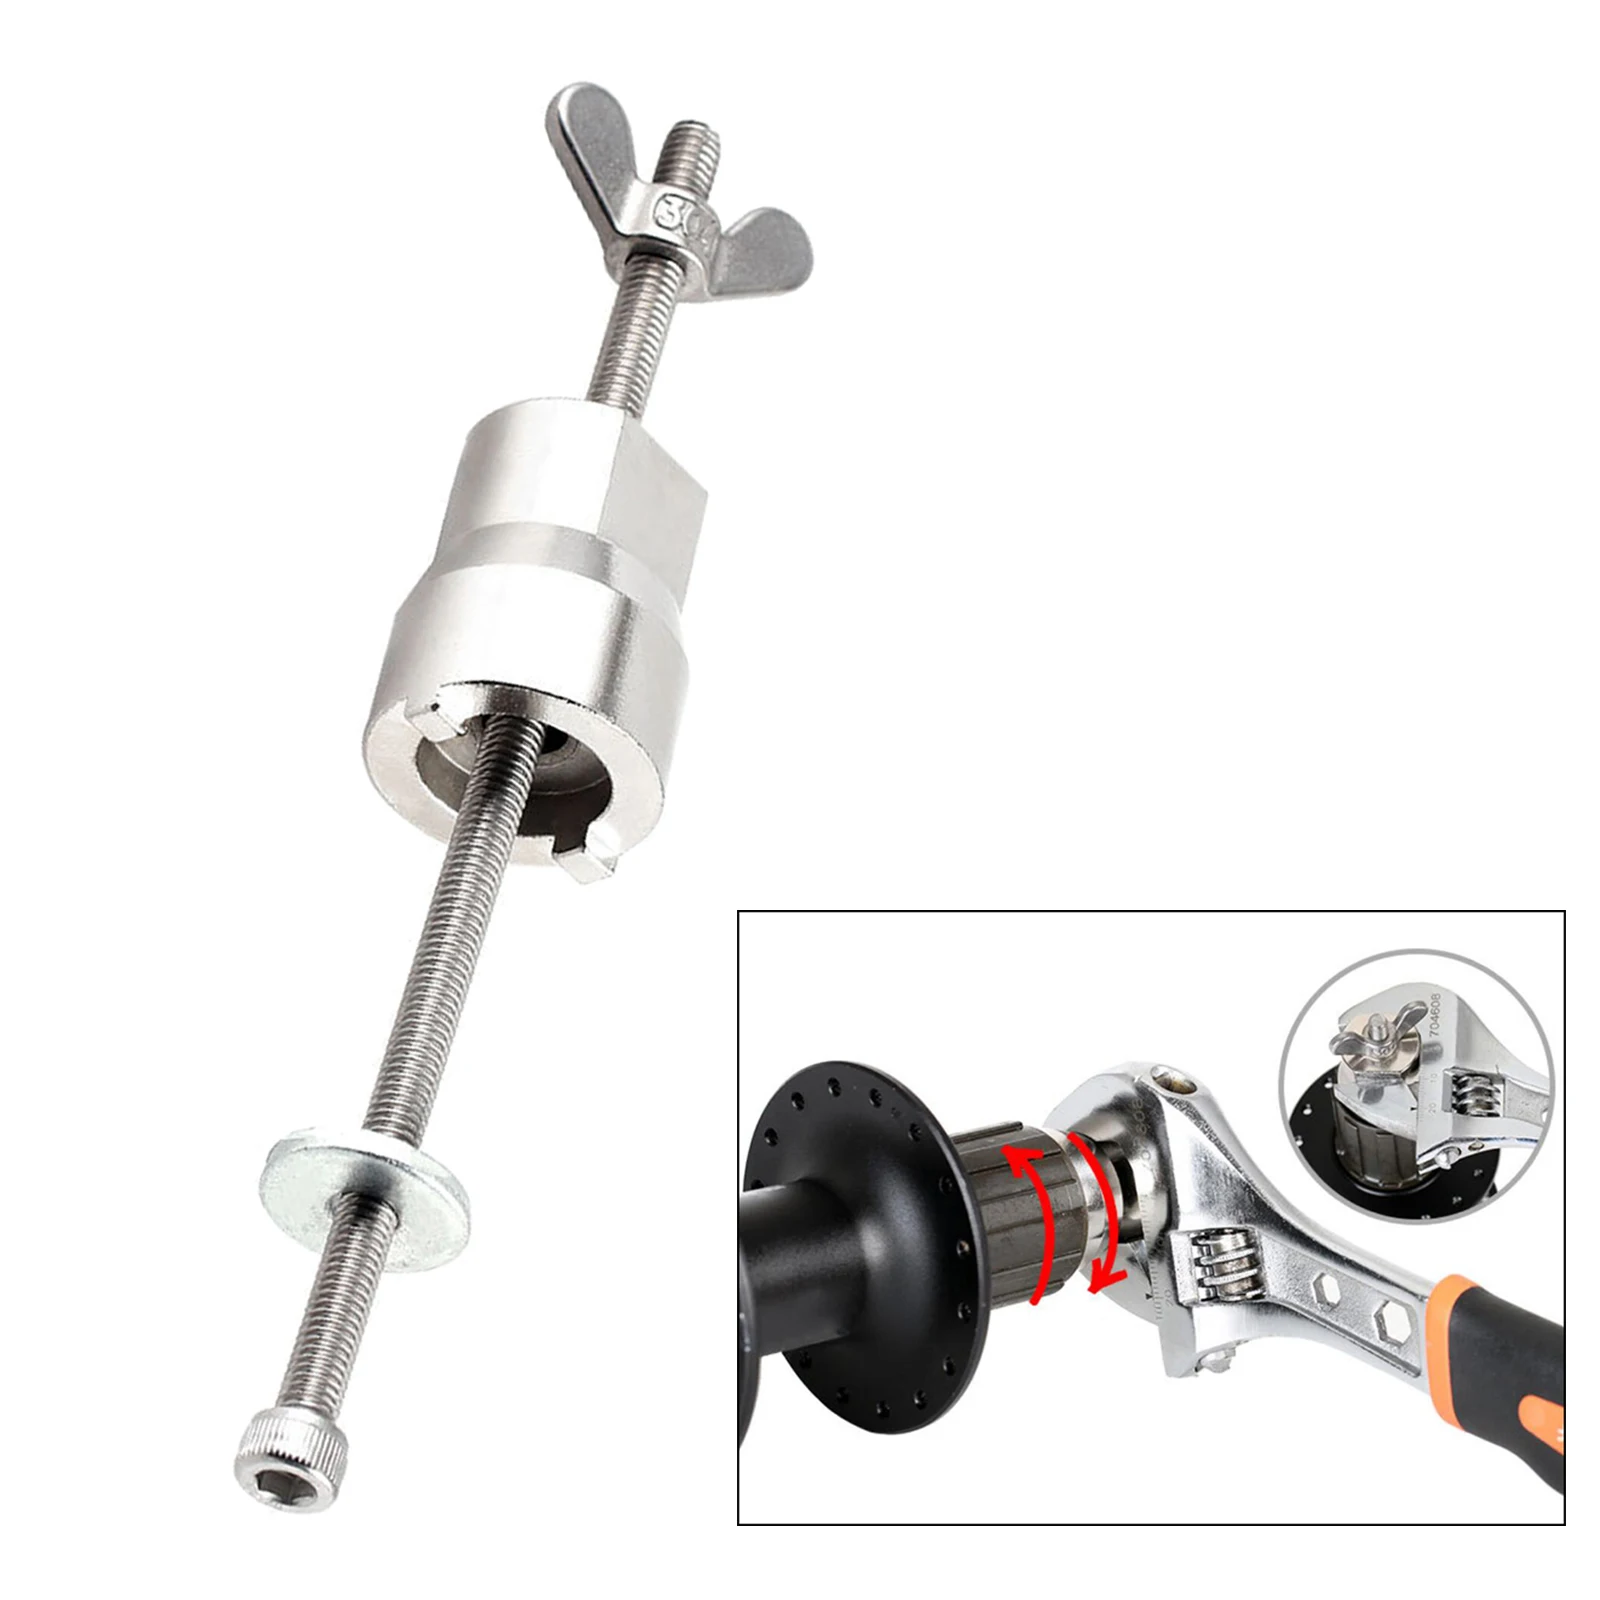 Bike Freehub Remover Installer Slotted Socket Wrench Hun Removal Tool